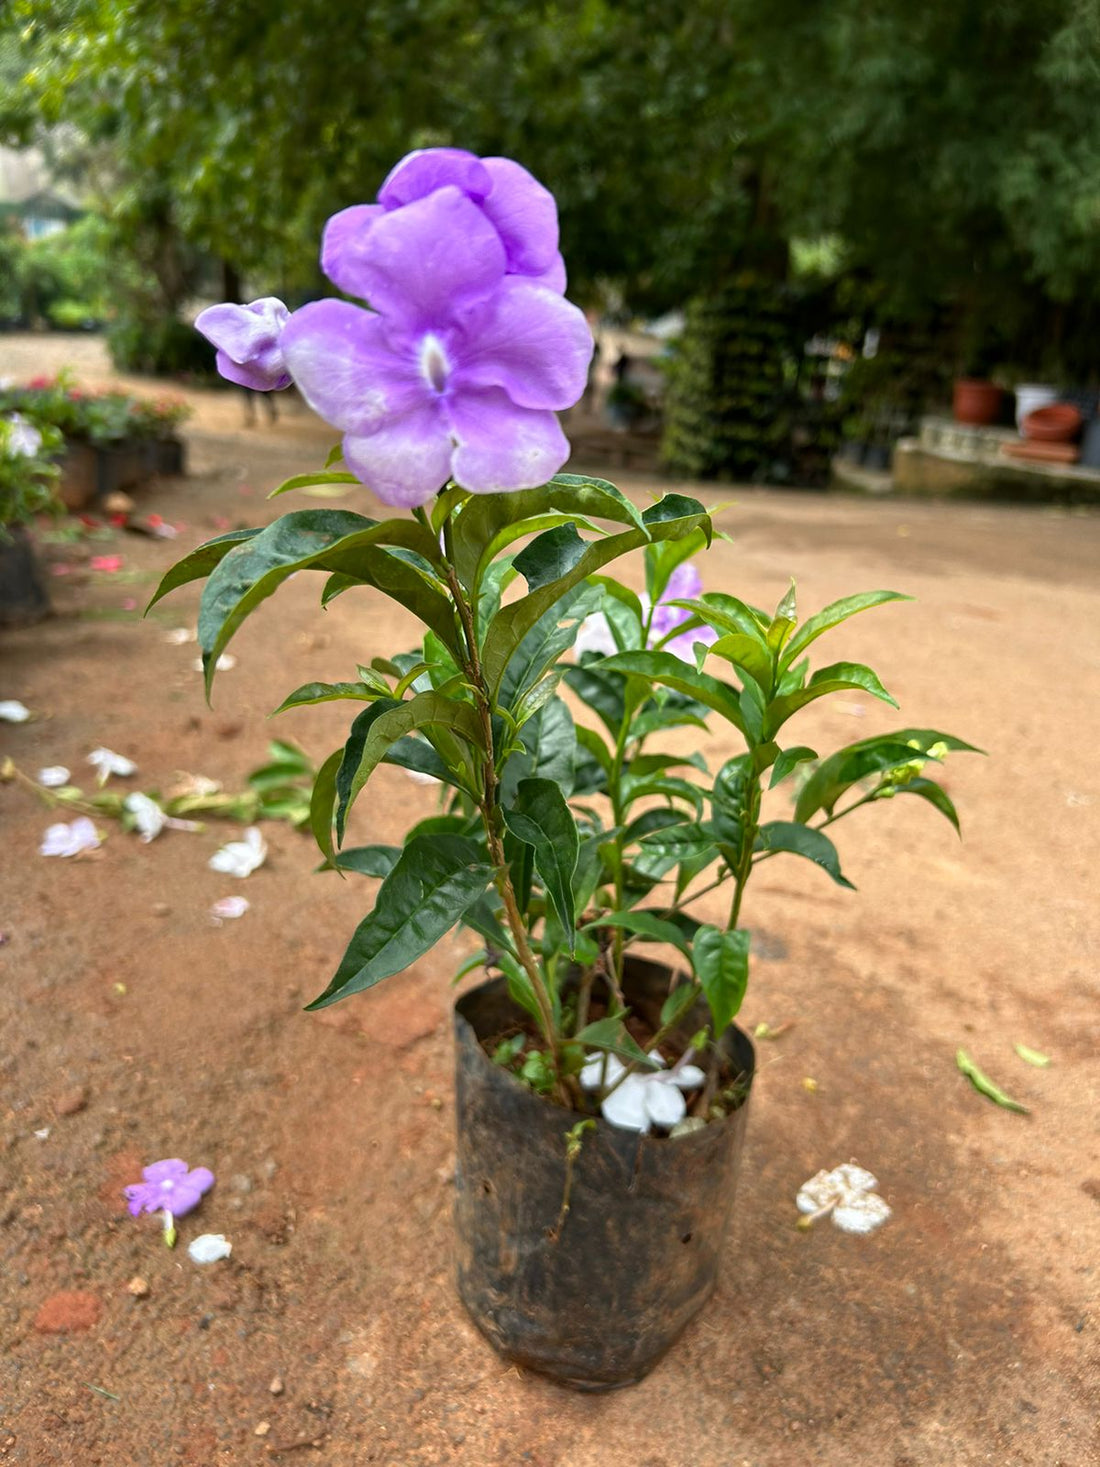 Yesterday Today Tommorrow Bigger Flowers (Brunfelsia pauciflora) Flowering Live Plant